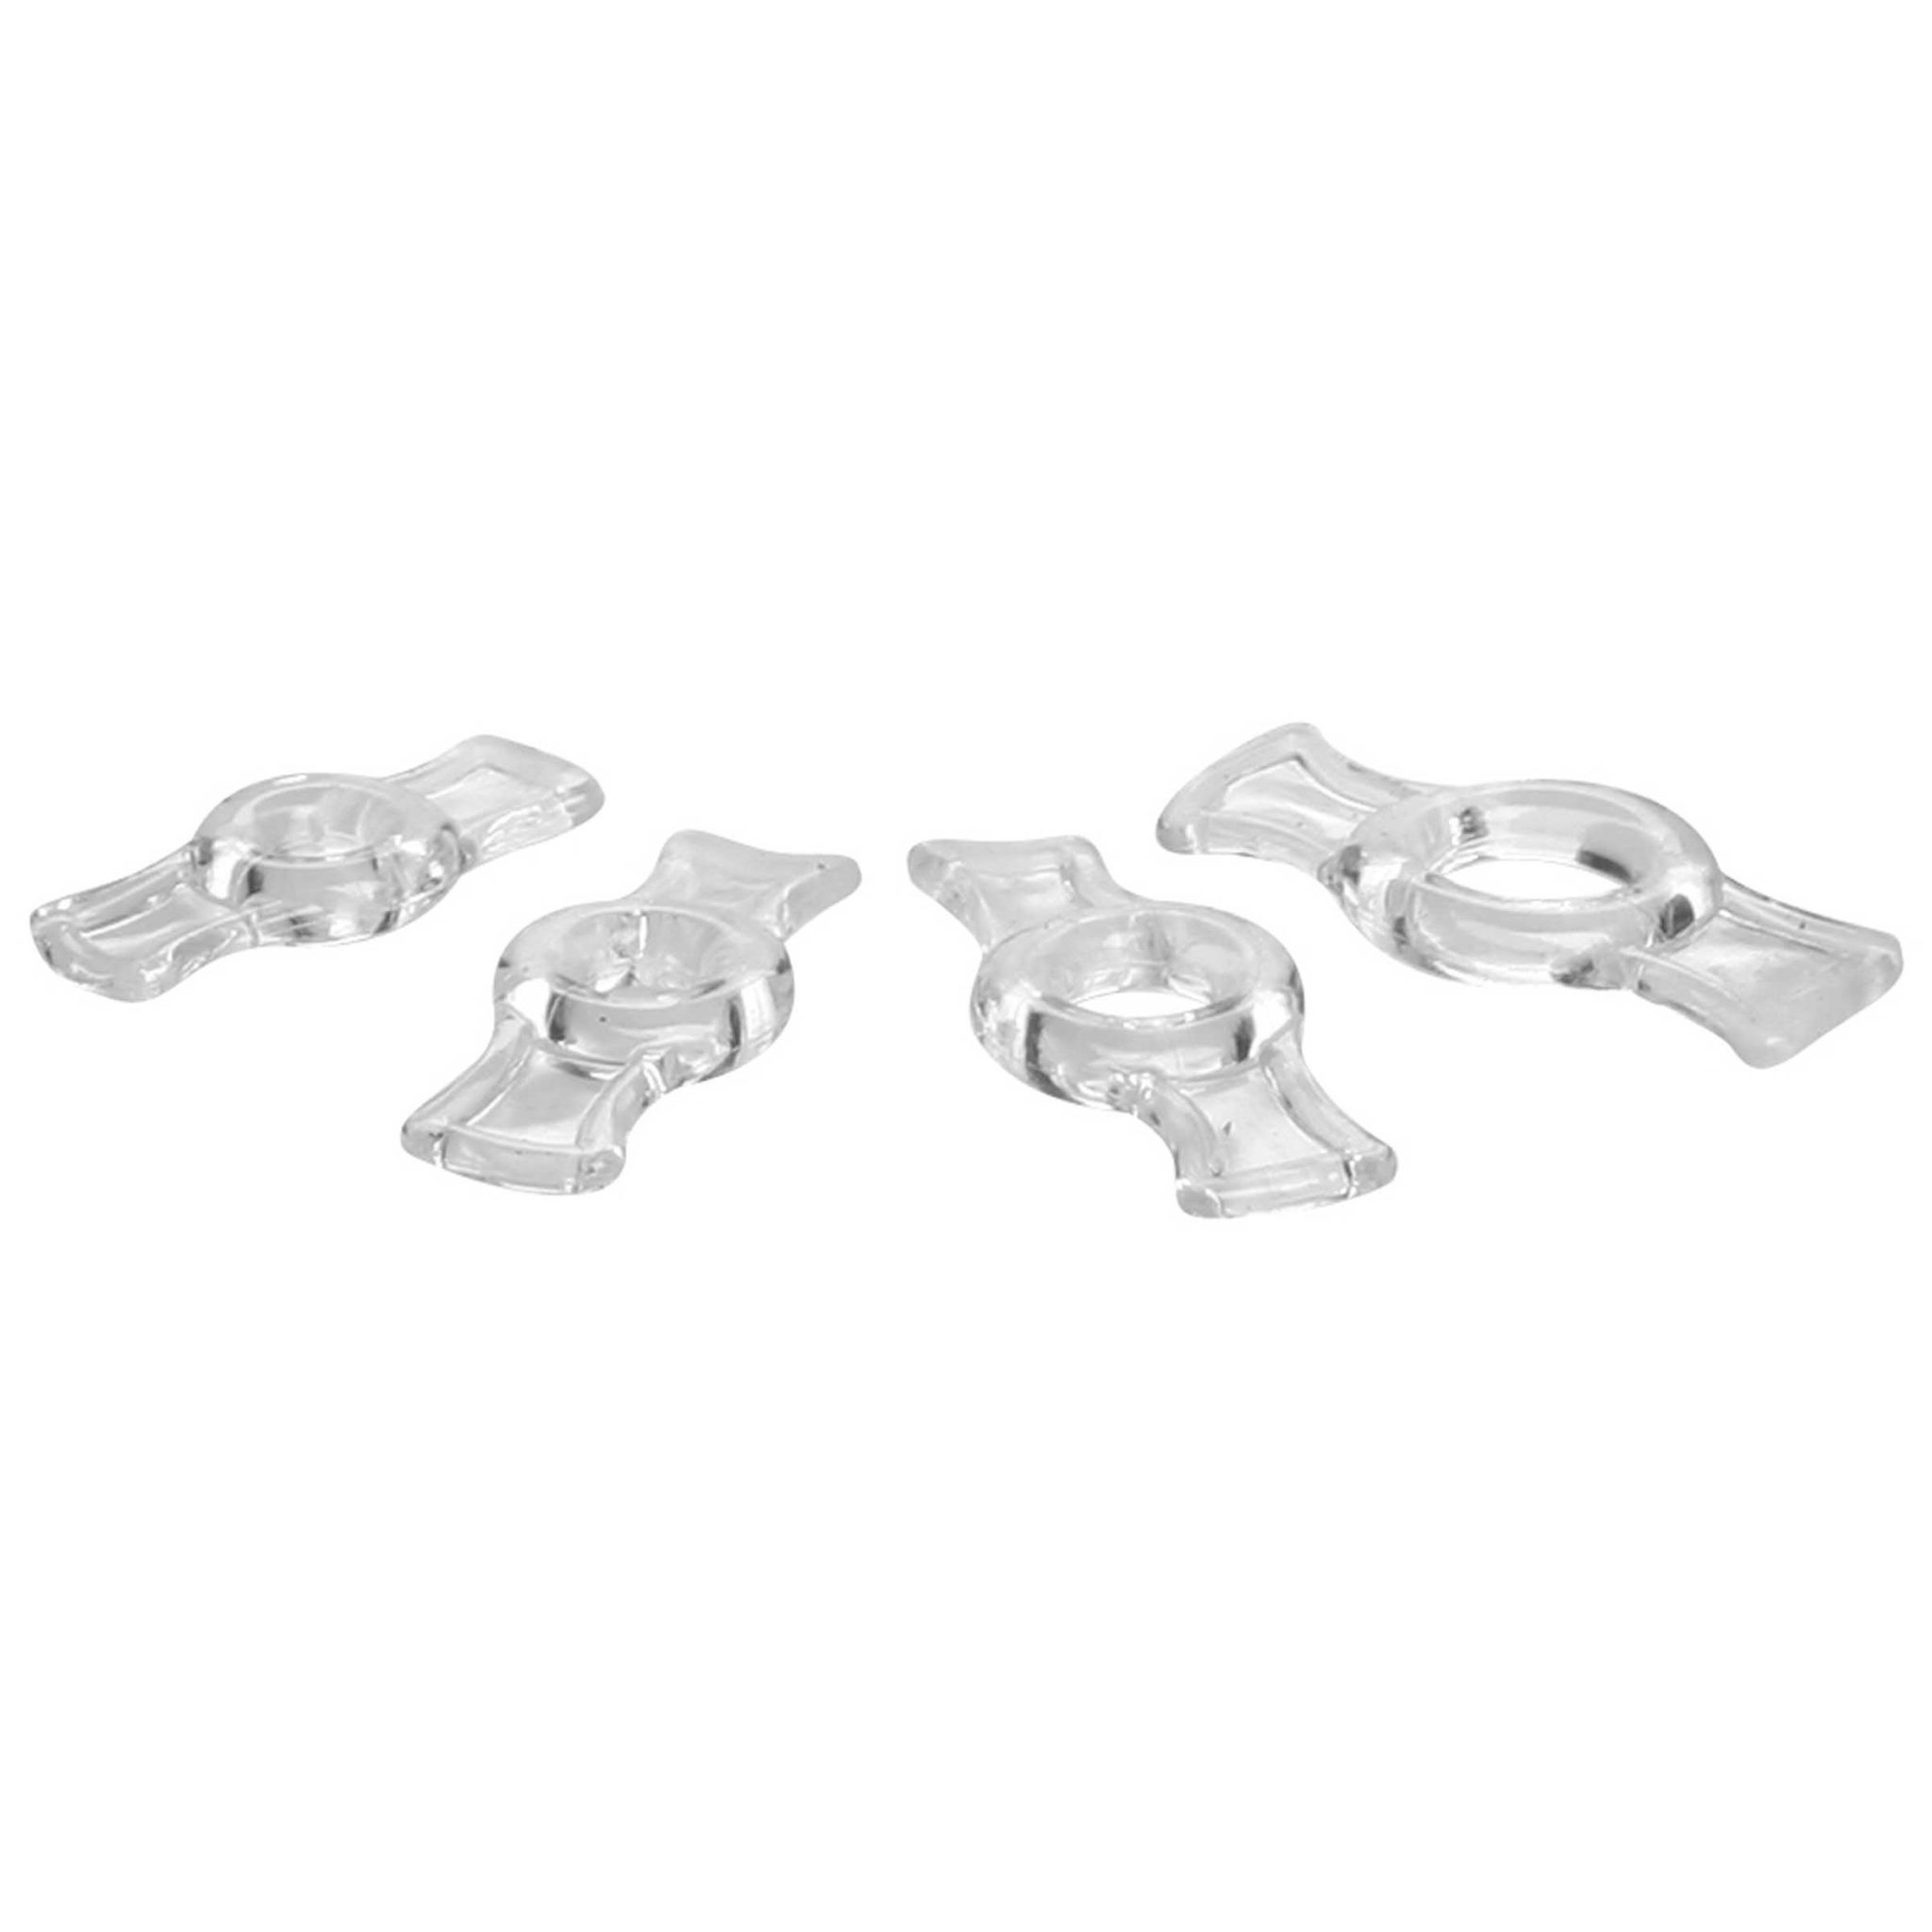 Size Matters Endurance Penis Ring Set – Clear